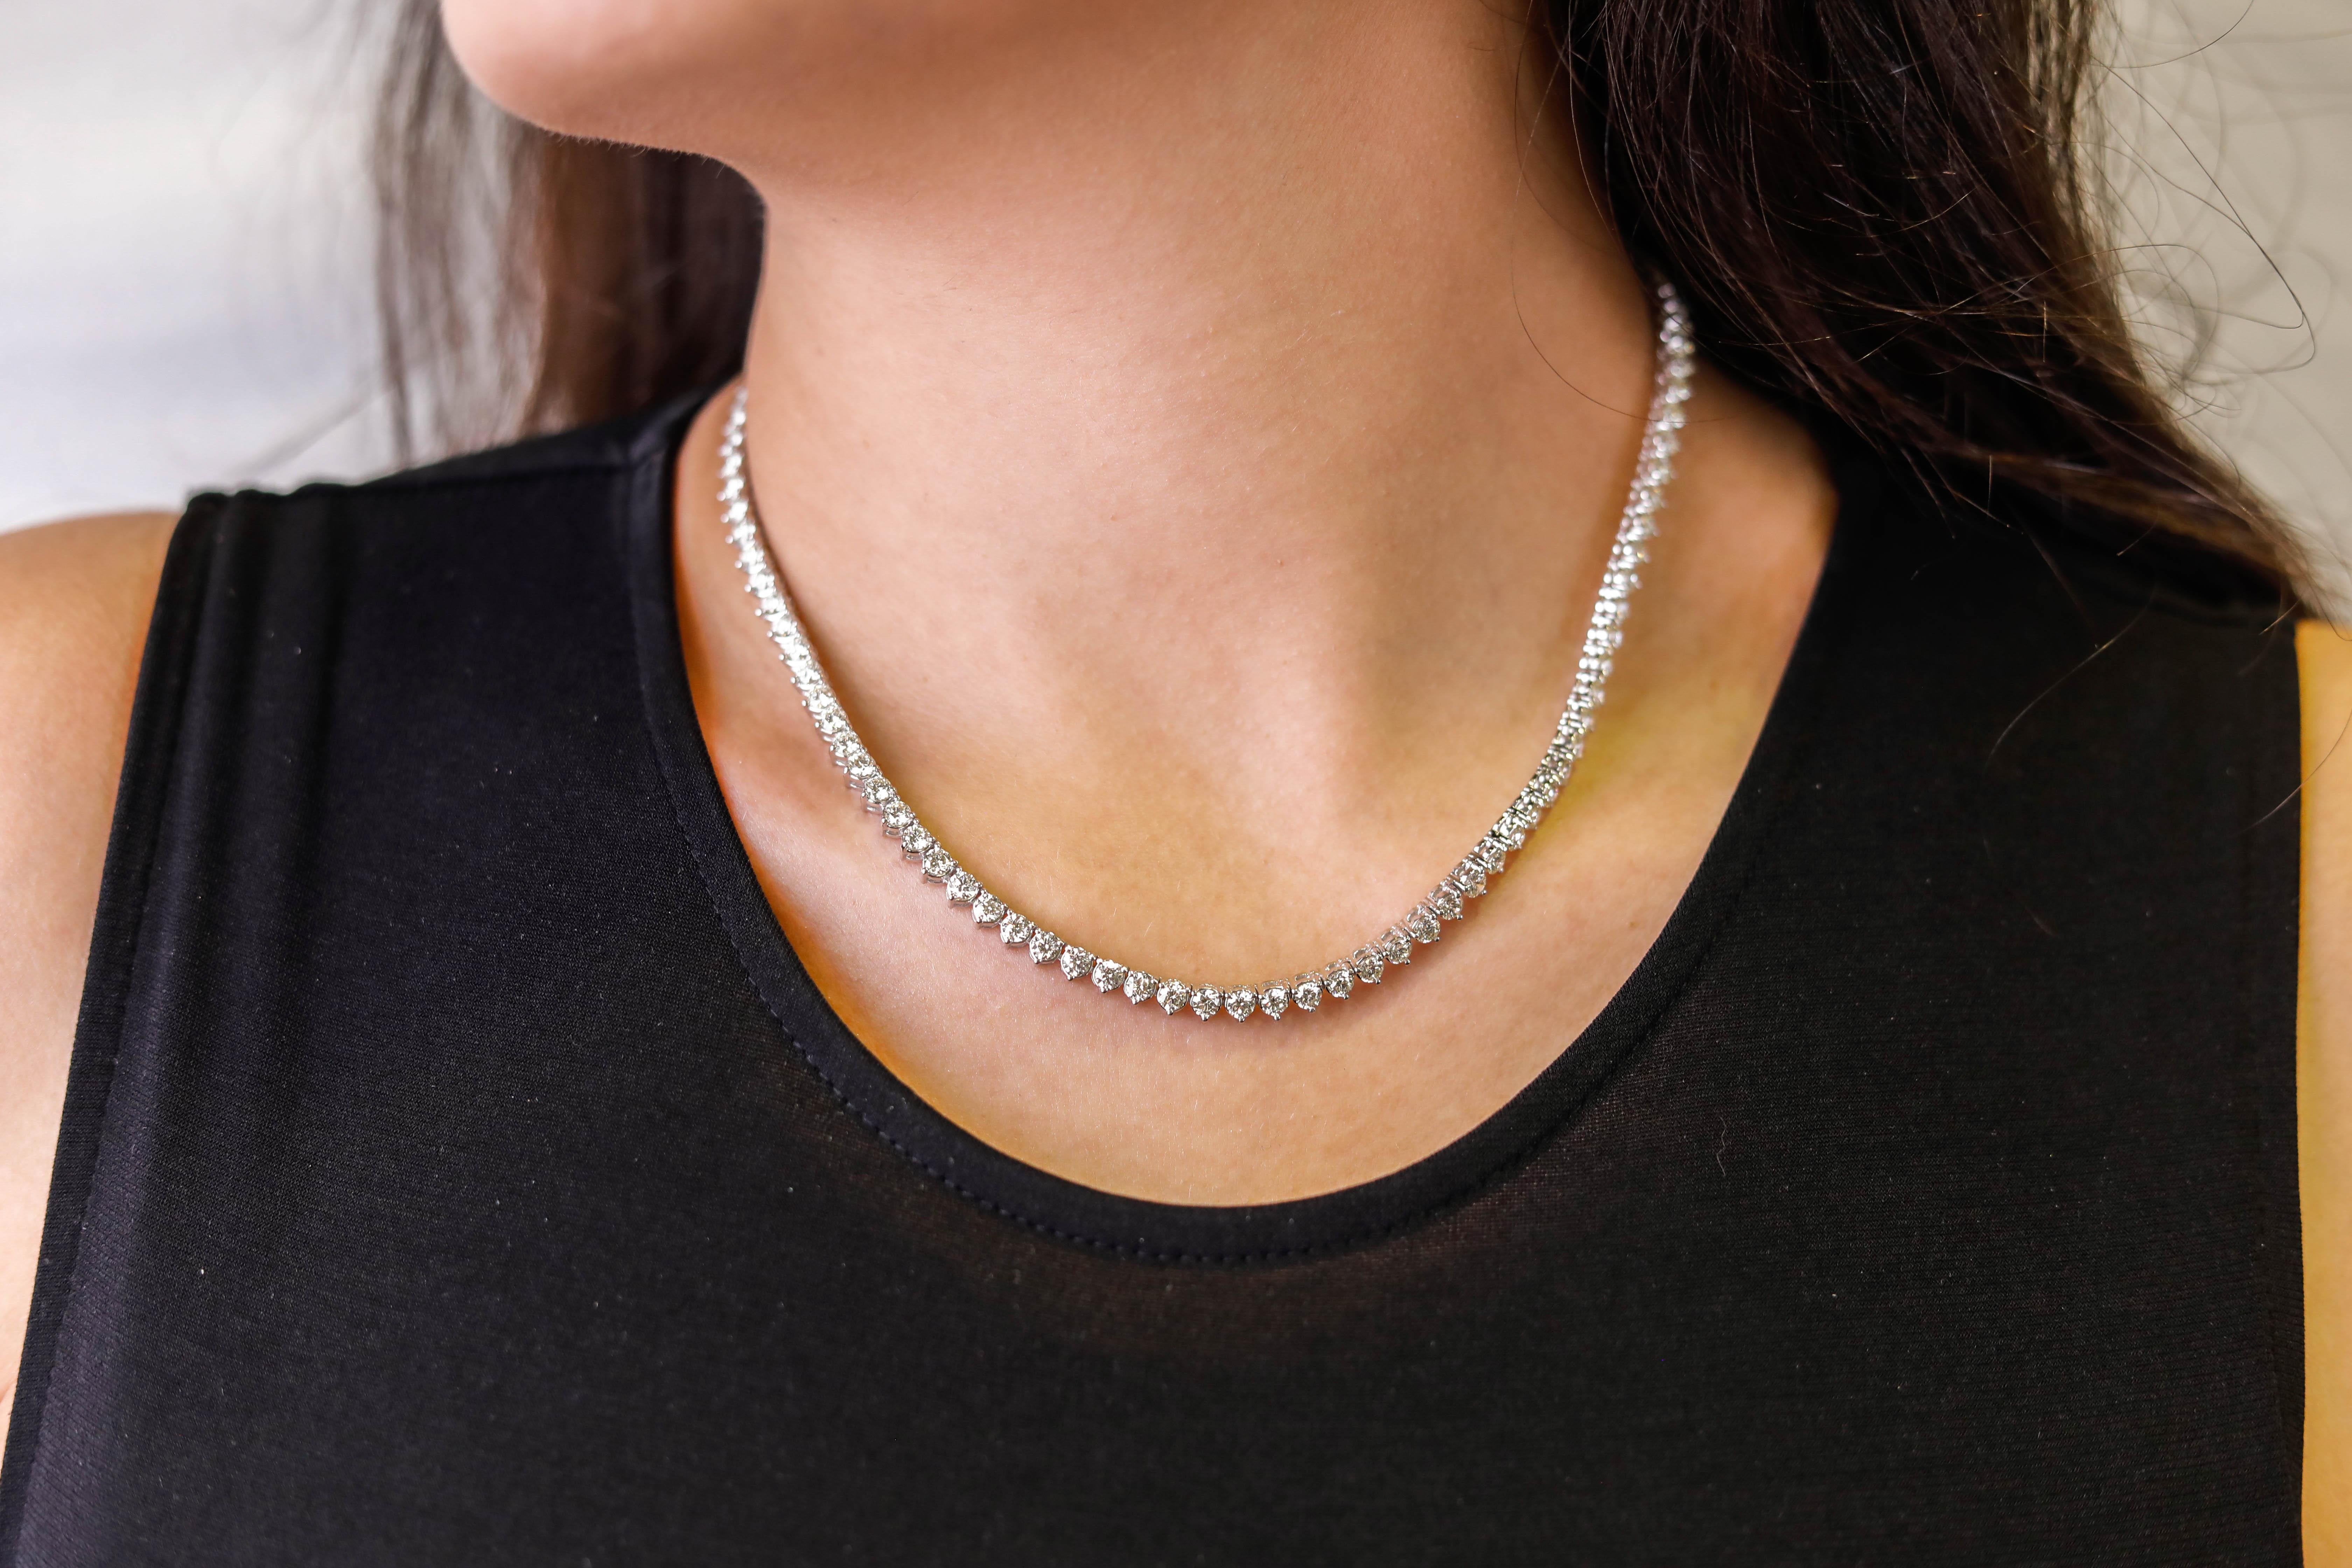 14 Karat White Gold 10 TCW Round Diamond Tennis Choker Fine Necklace Wedding

Flashy accent to your wardrobe. This tennis style necklace features, tcw shimmering diamonds, layered throughout the whole necklace, set in a prong setting. Secure clasp.